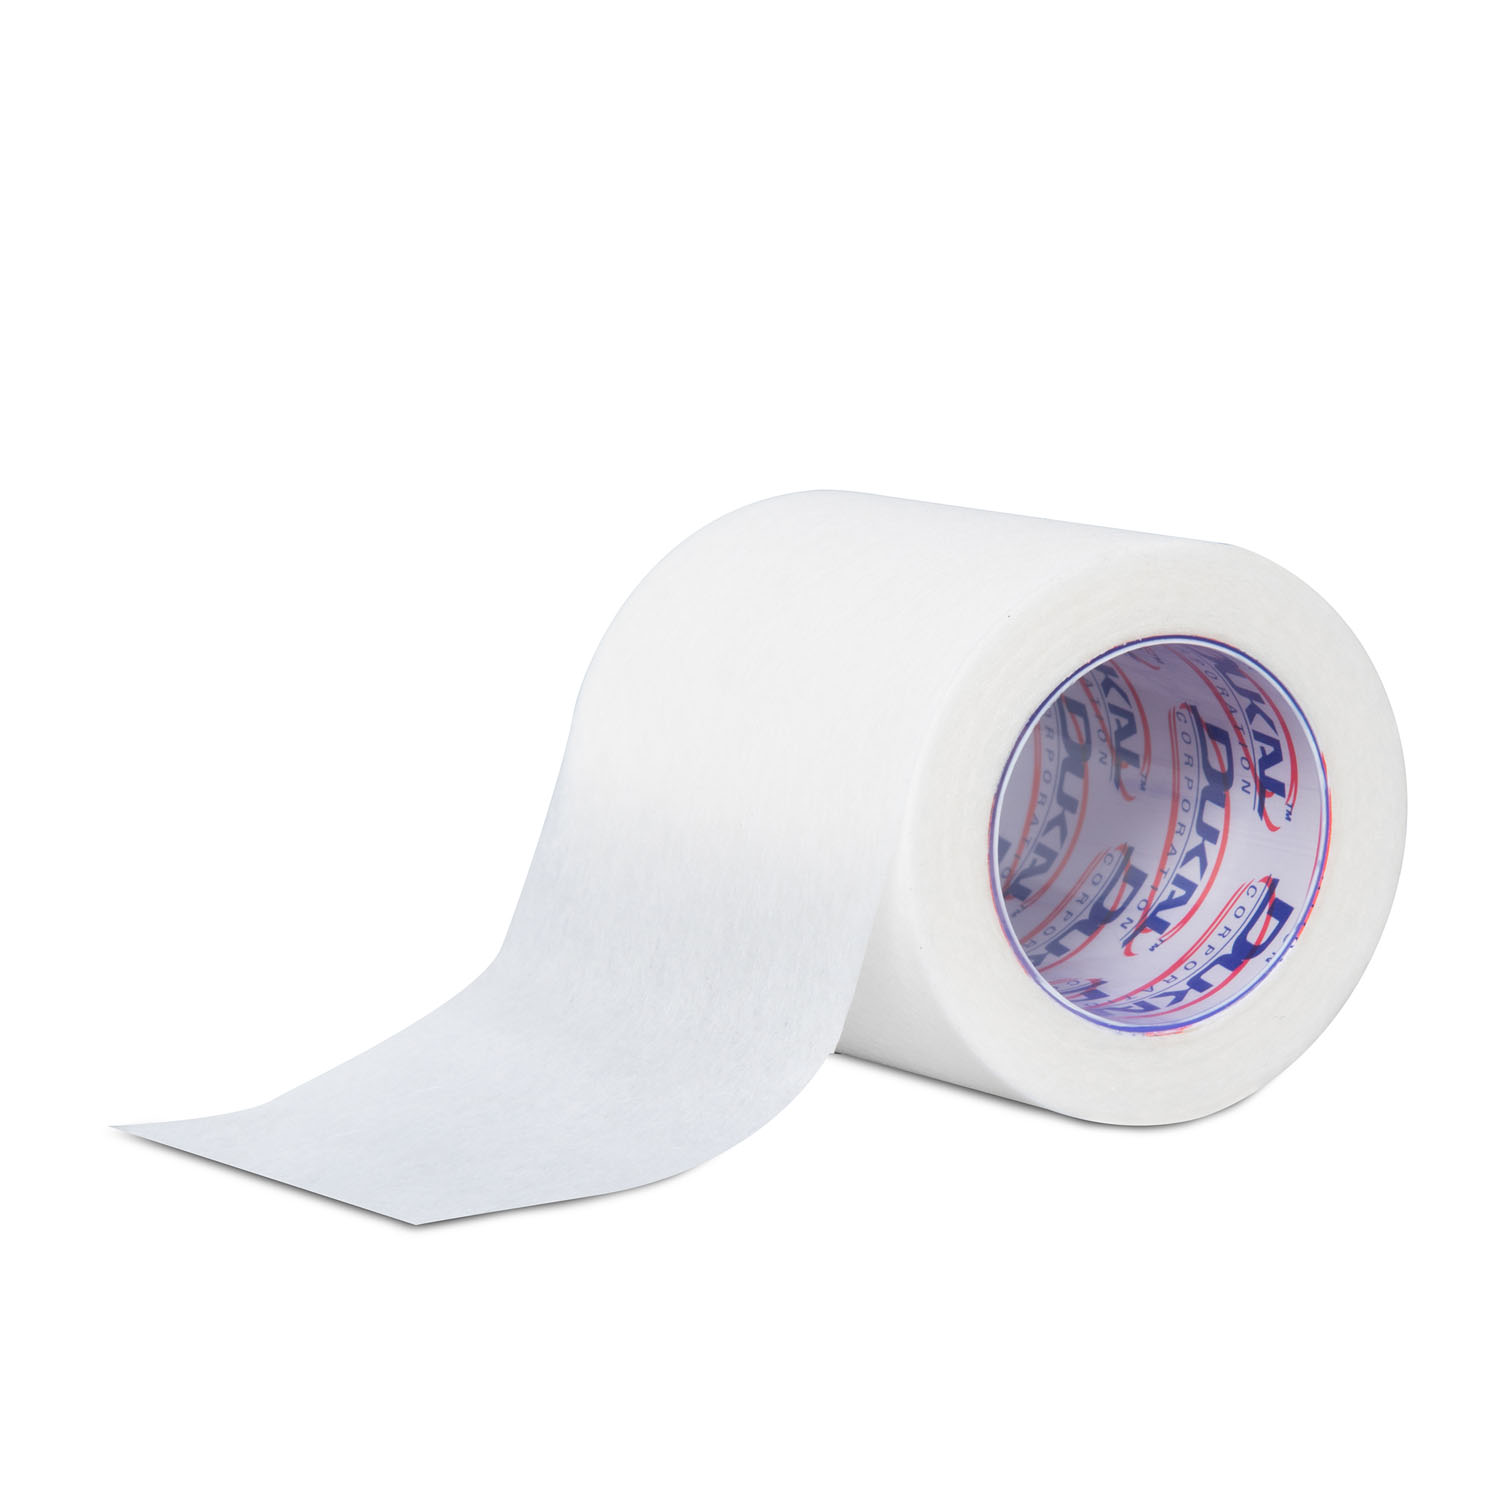 DUKAL SURGICAL TAPE - PAPER : P210 BX $8.49 Stocked